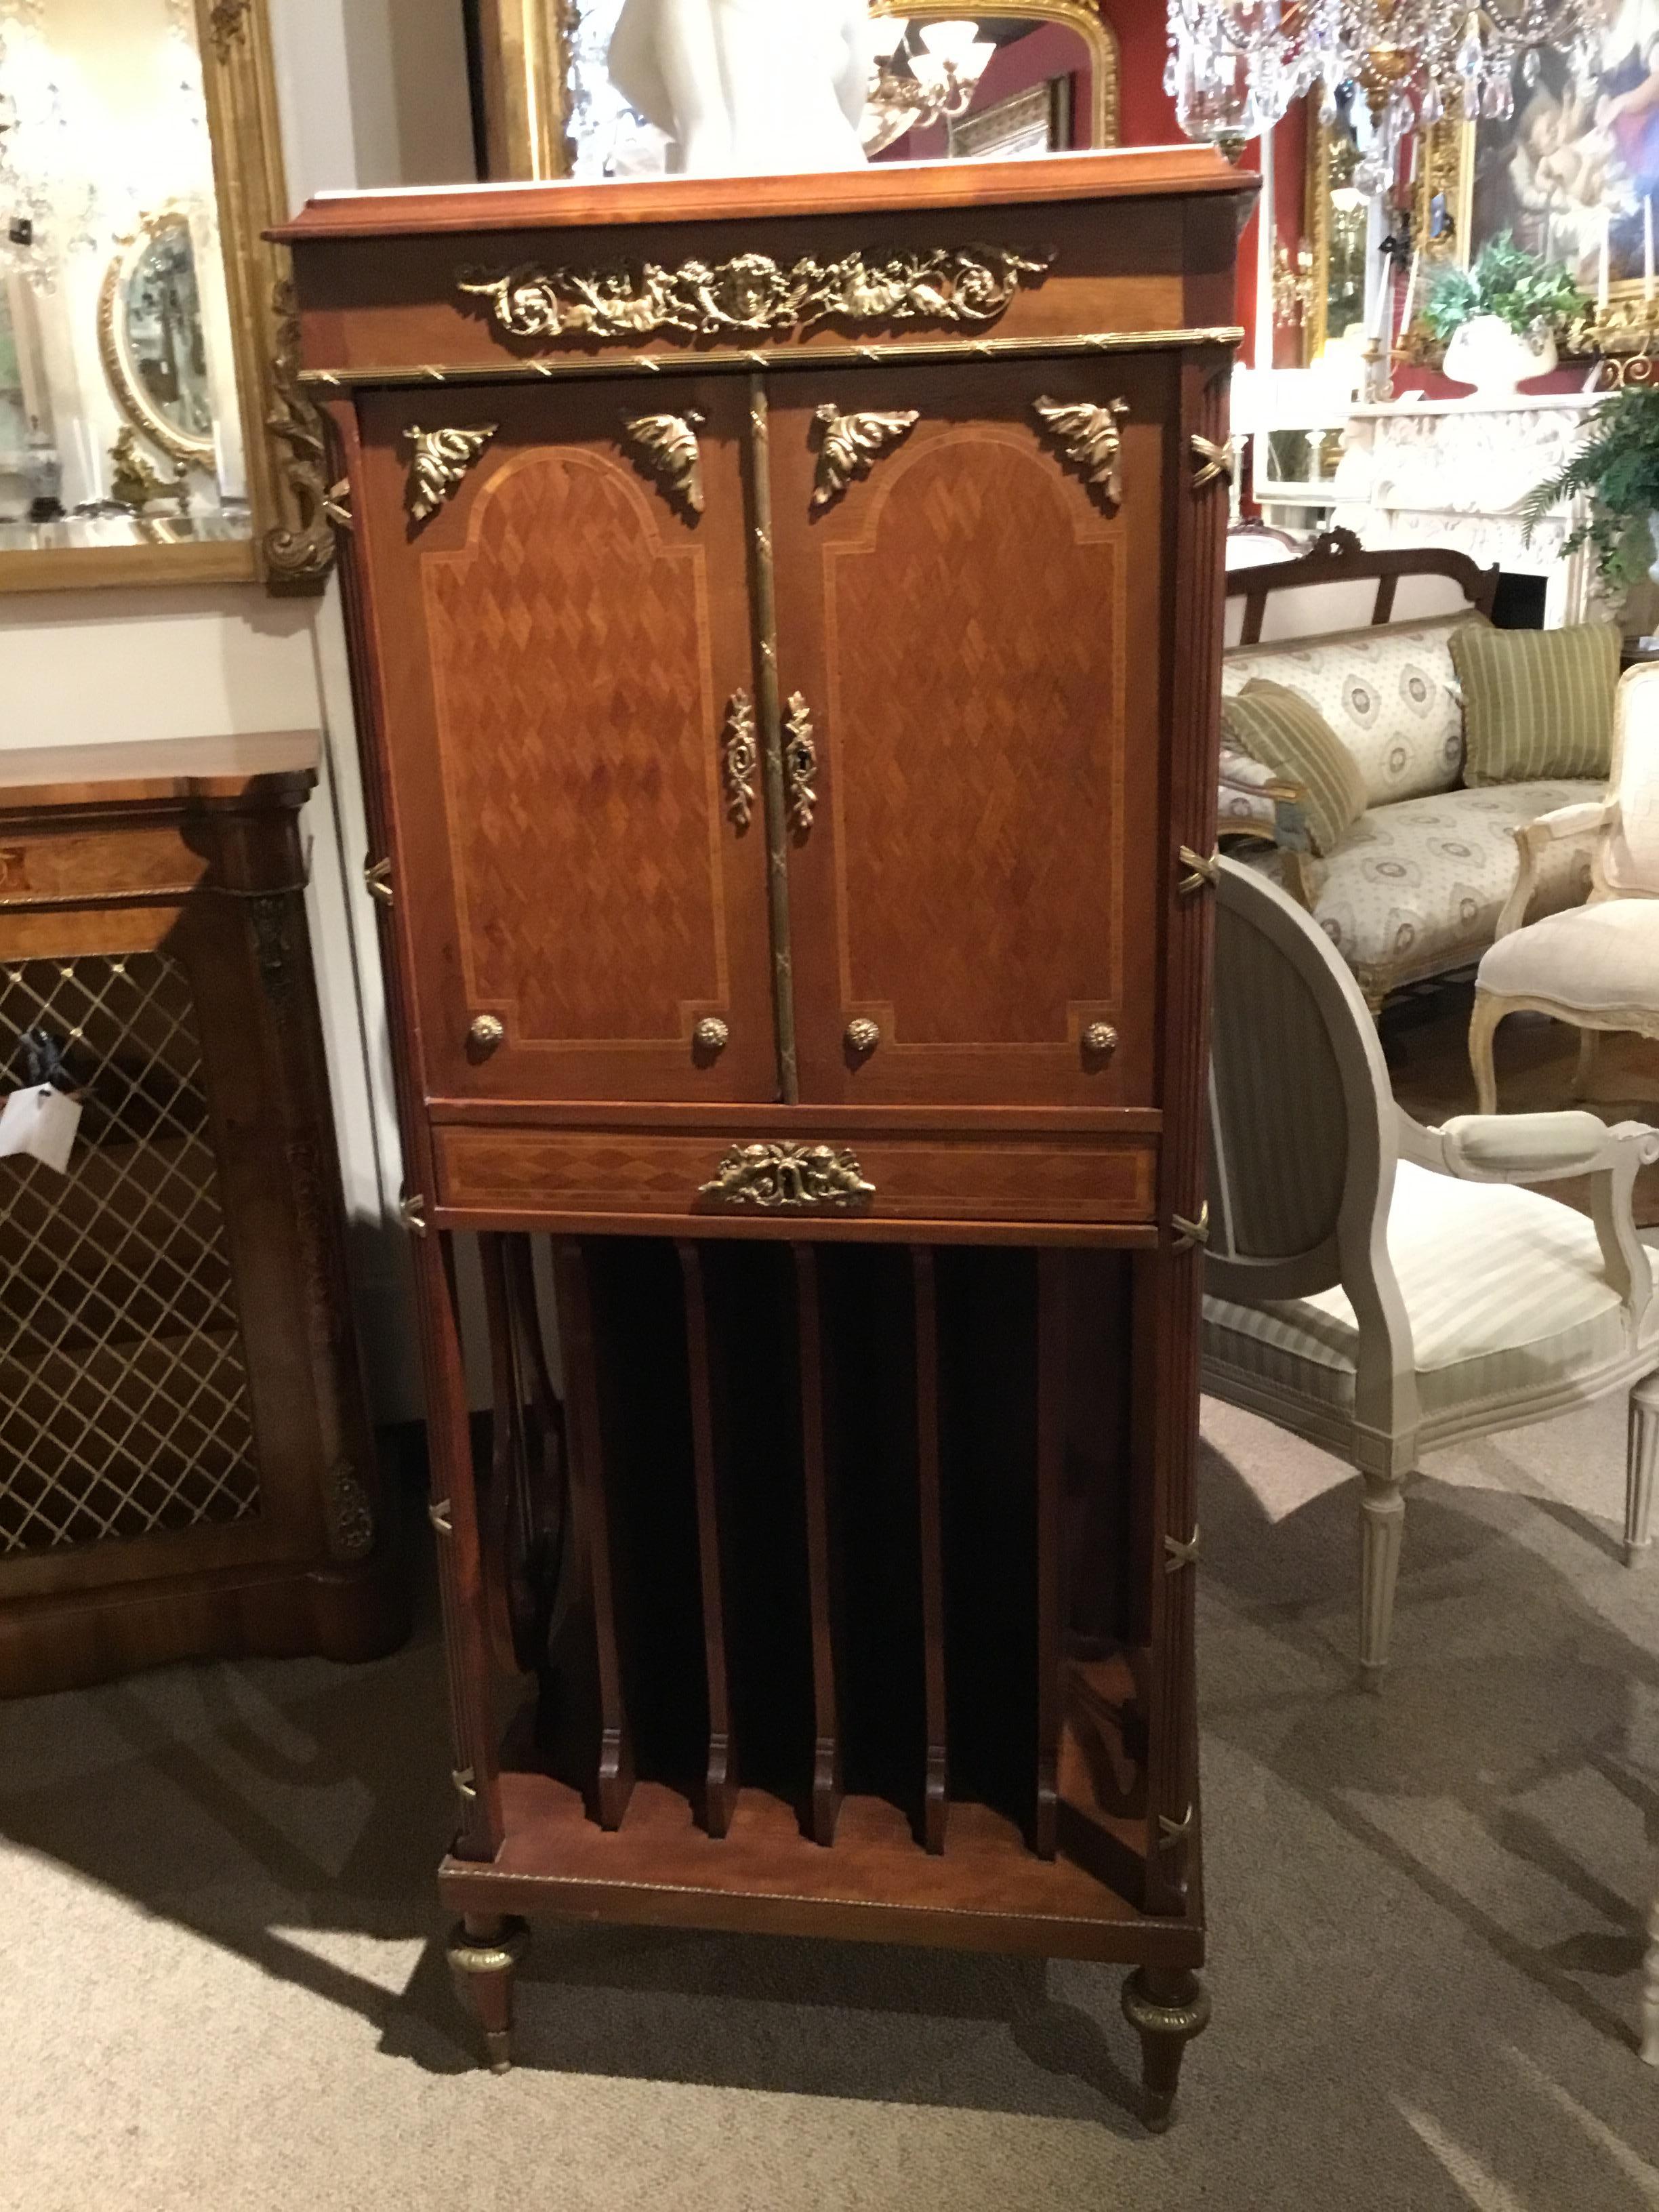 Elegant and petite music cabinet with marquetry in walnut and satinwood. Two doors open to
Shelves for music. One drawer below opens for more storage. Divided panels are vertical to
separate additional musical books.